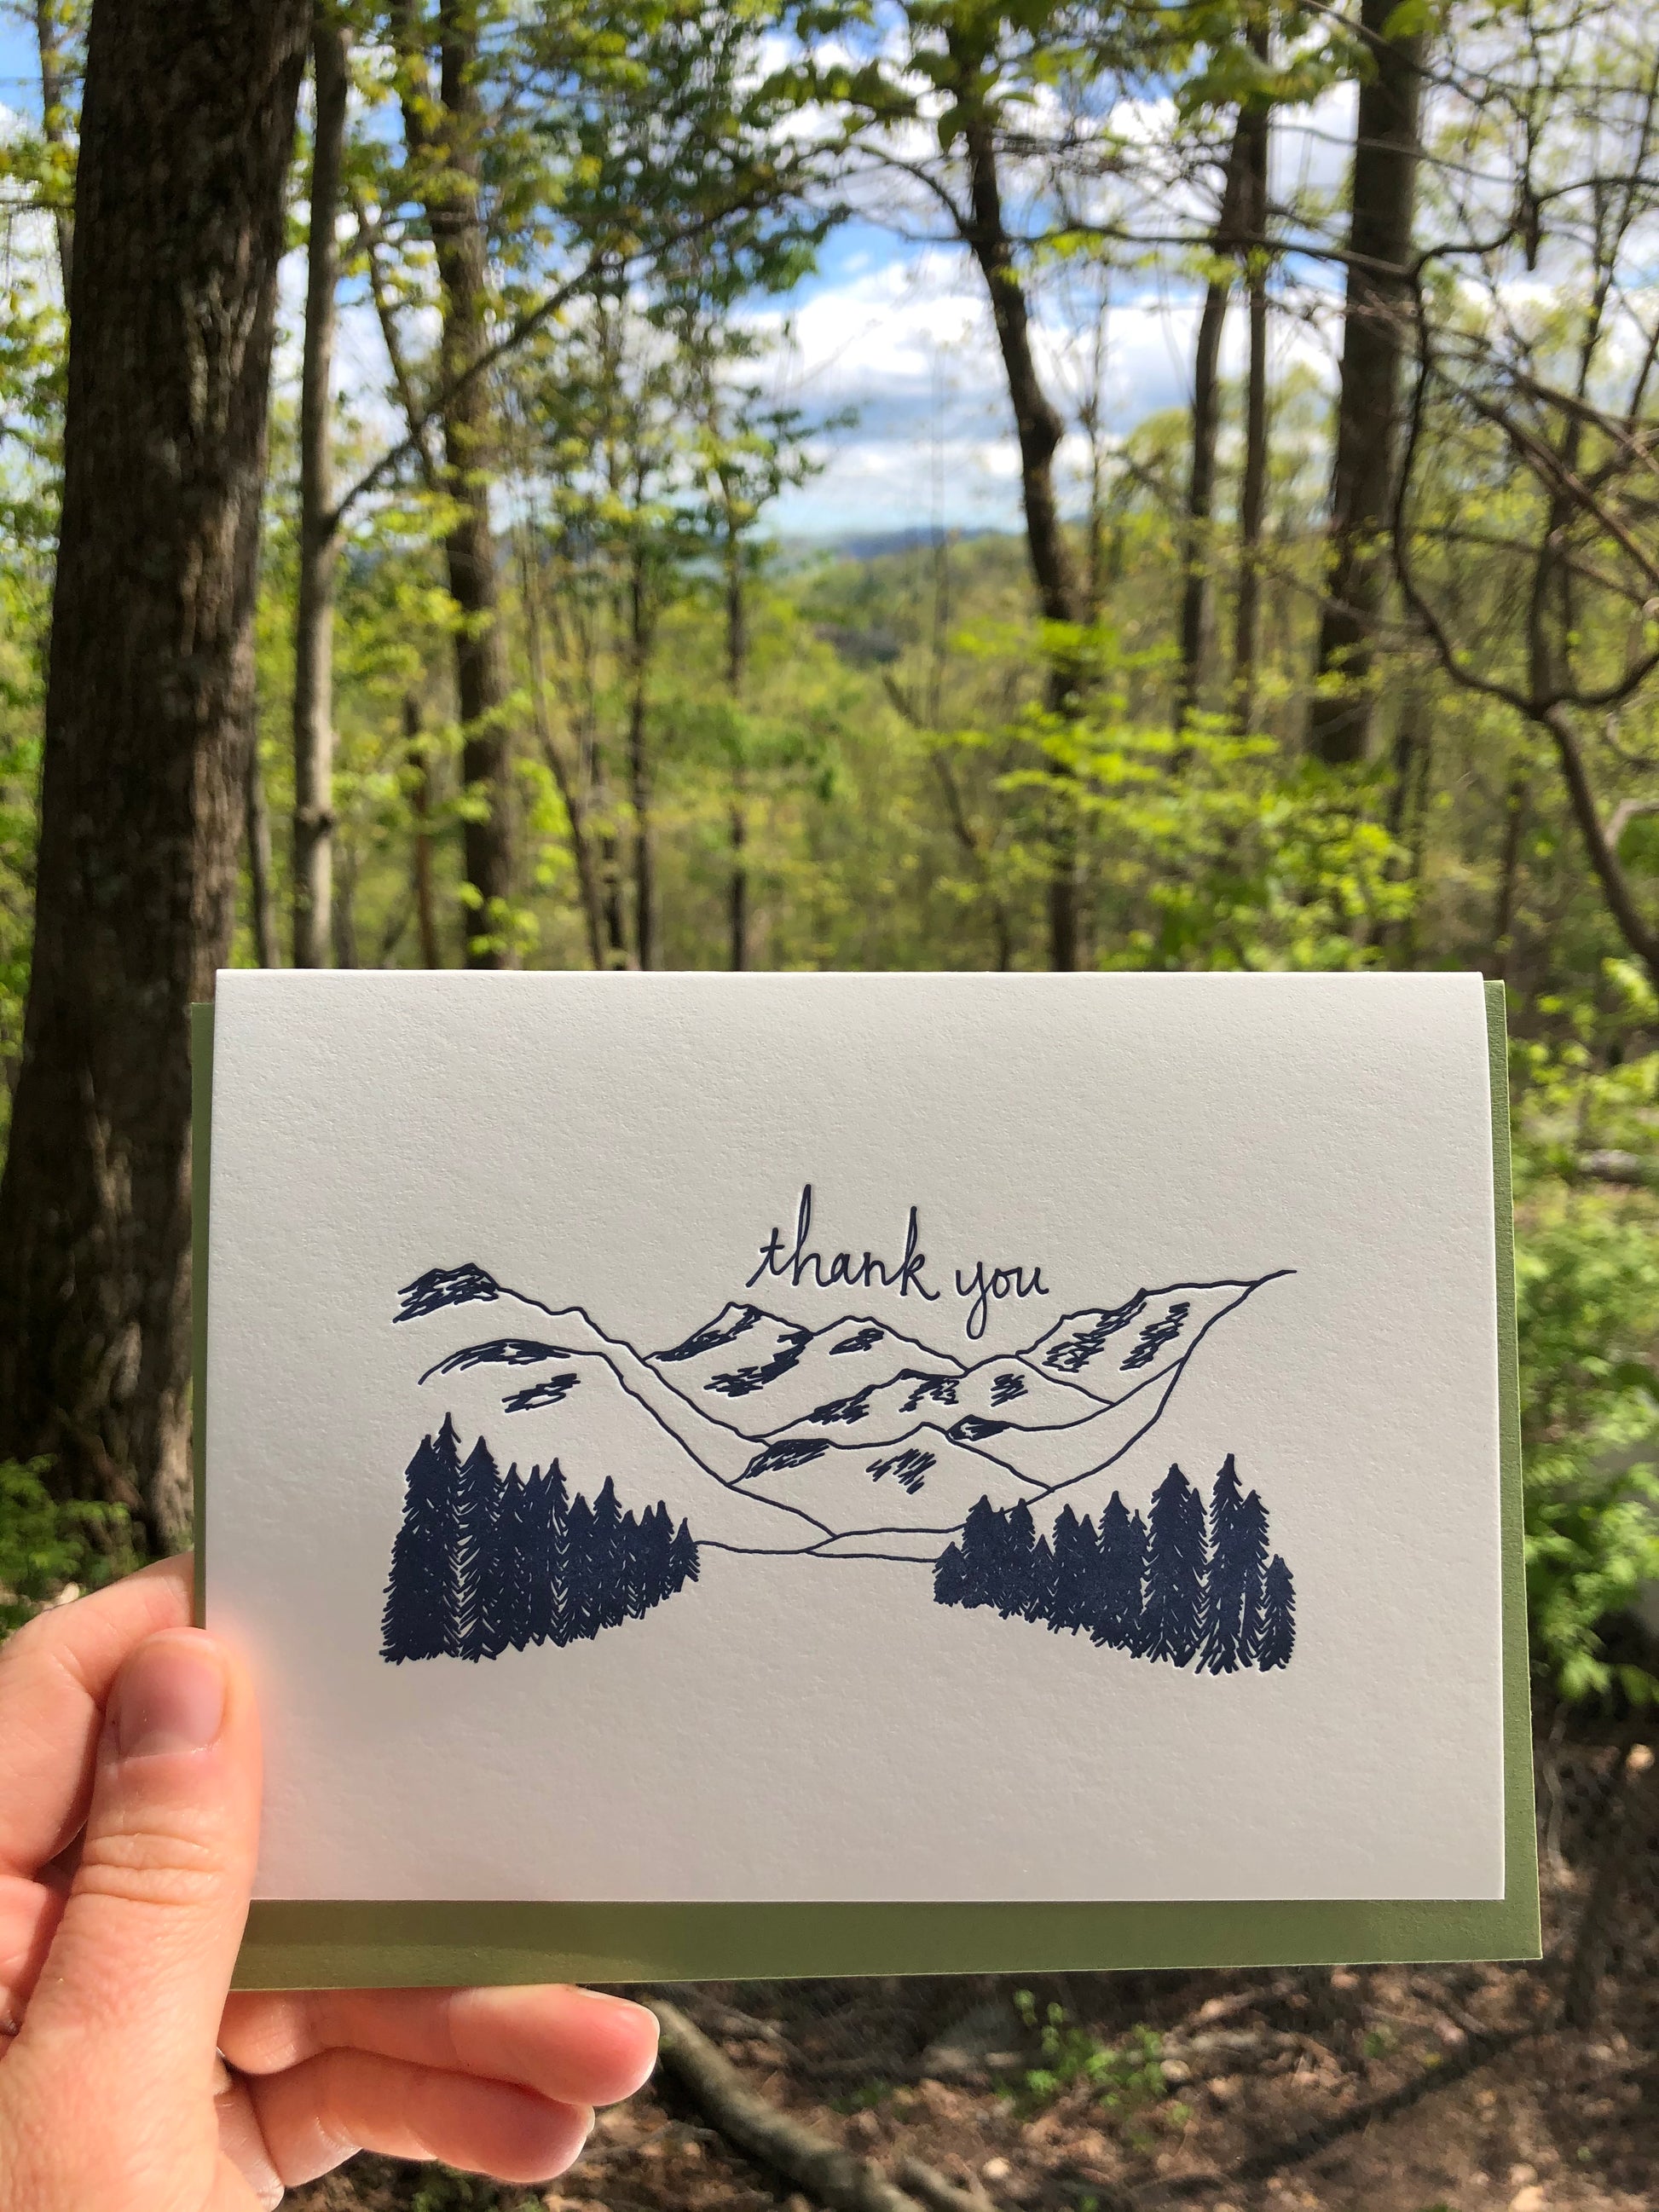 Letterpress greeting card featuring hand-drawn mountain landcape, printed in a rich navy ink. Whimsical hand-drawn text saying "Thank you" is shown above the moutains, in the same navy ink. The card is white, blank inside, and is paired with a rich green envelope. The card is shown outside on a sunny day in Spring. 